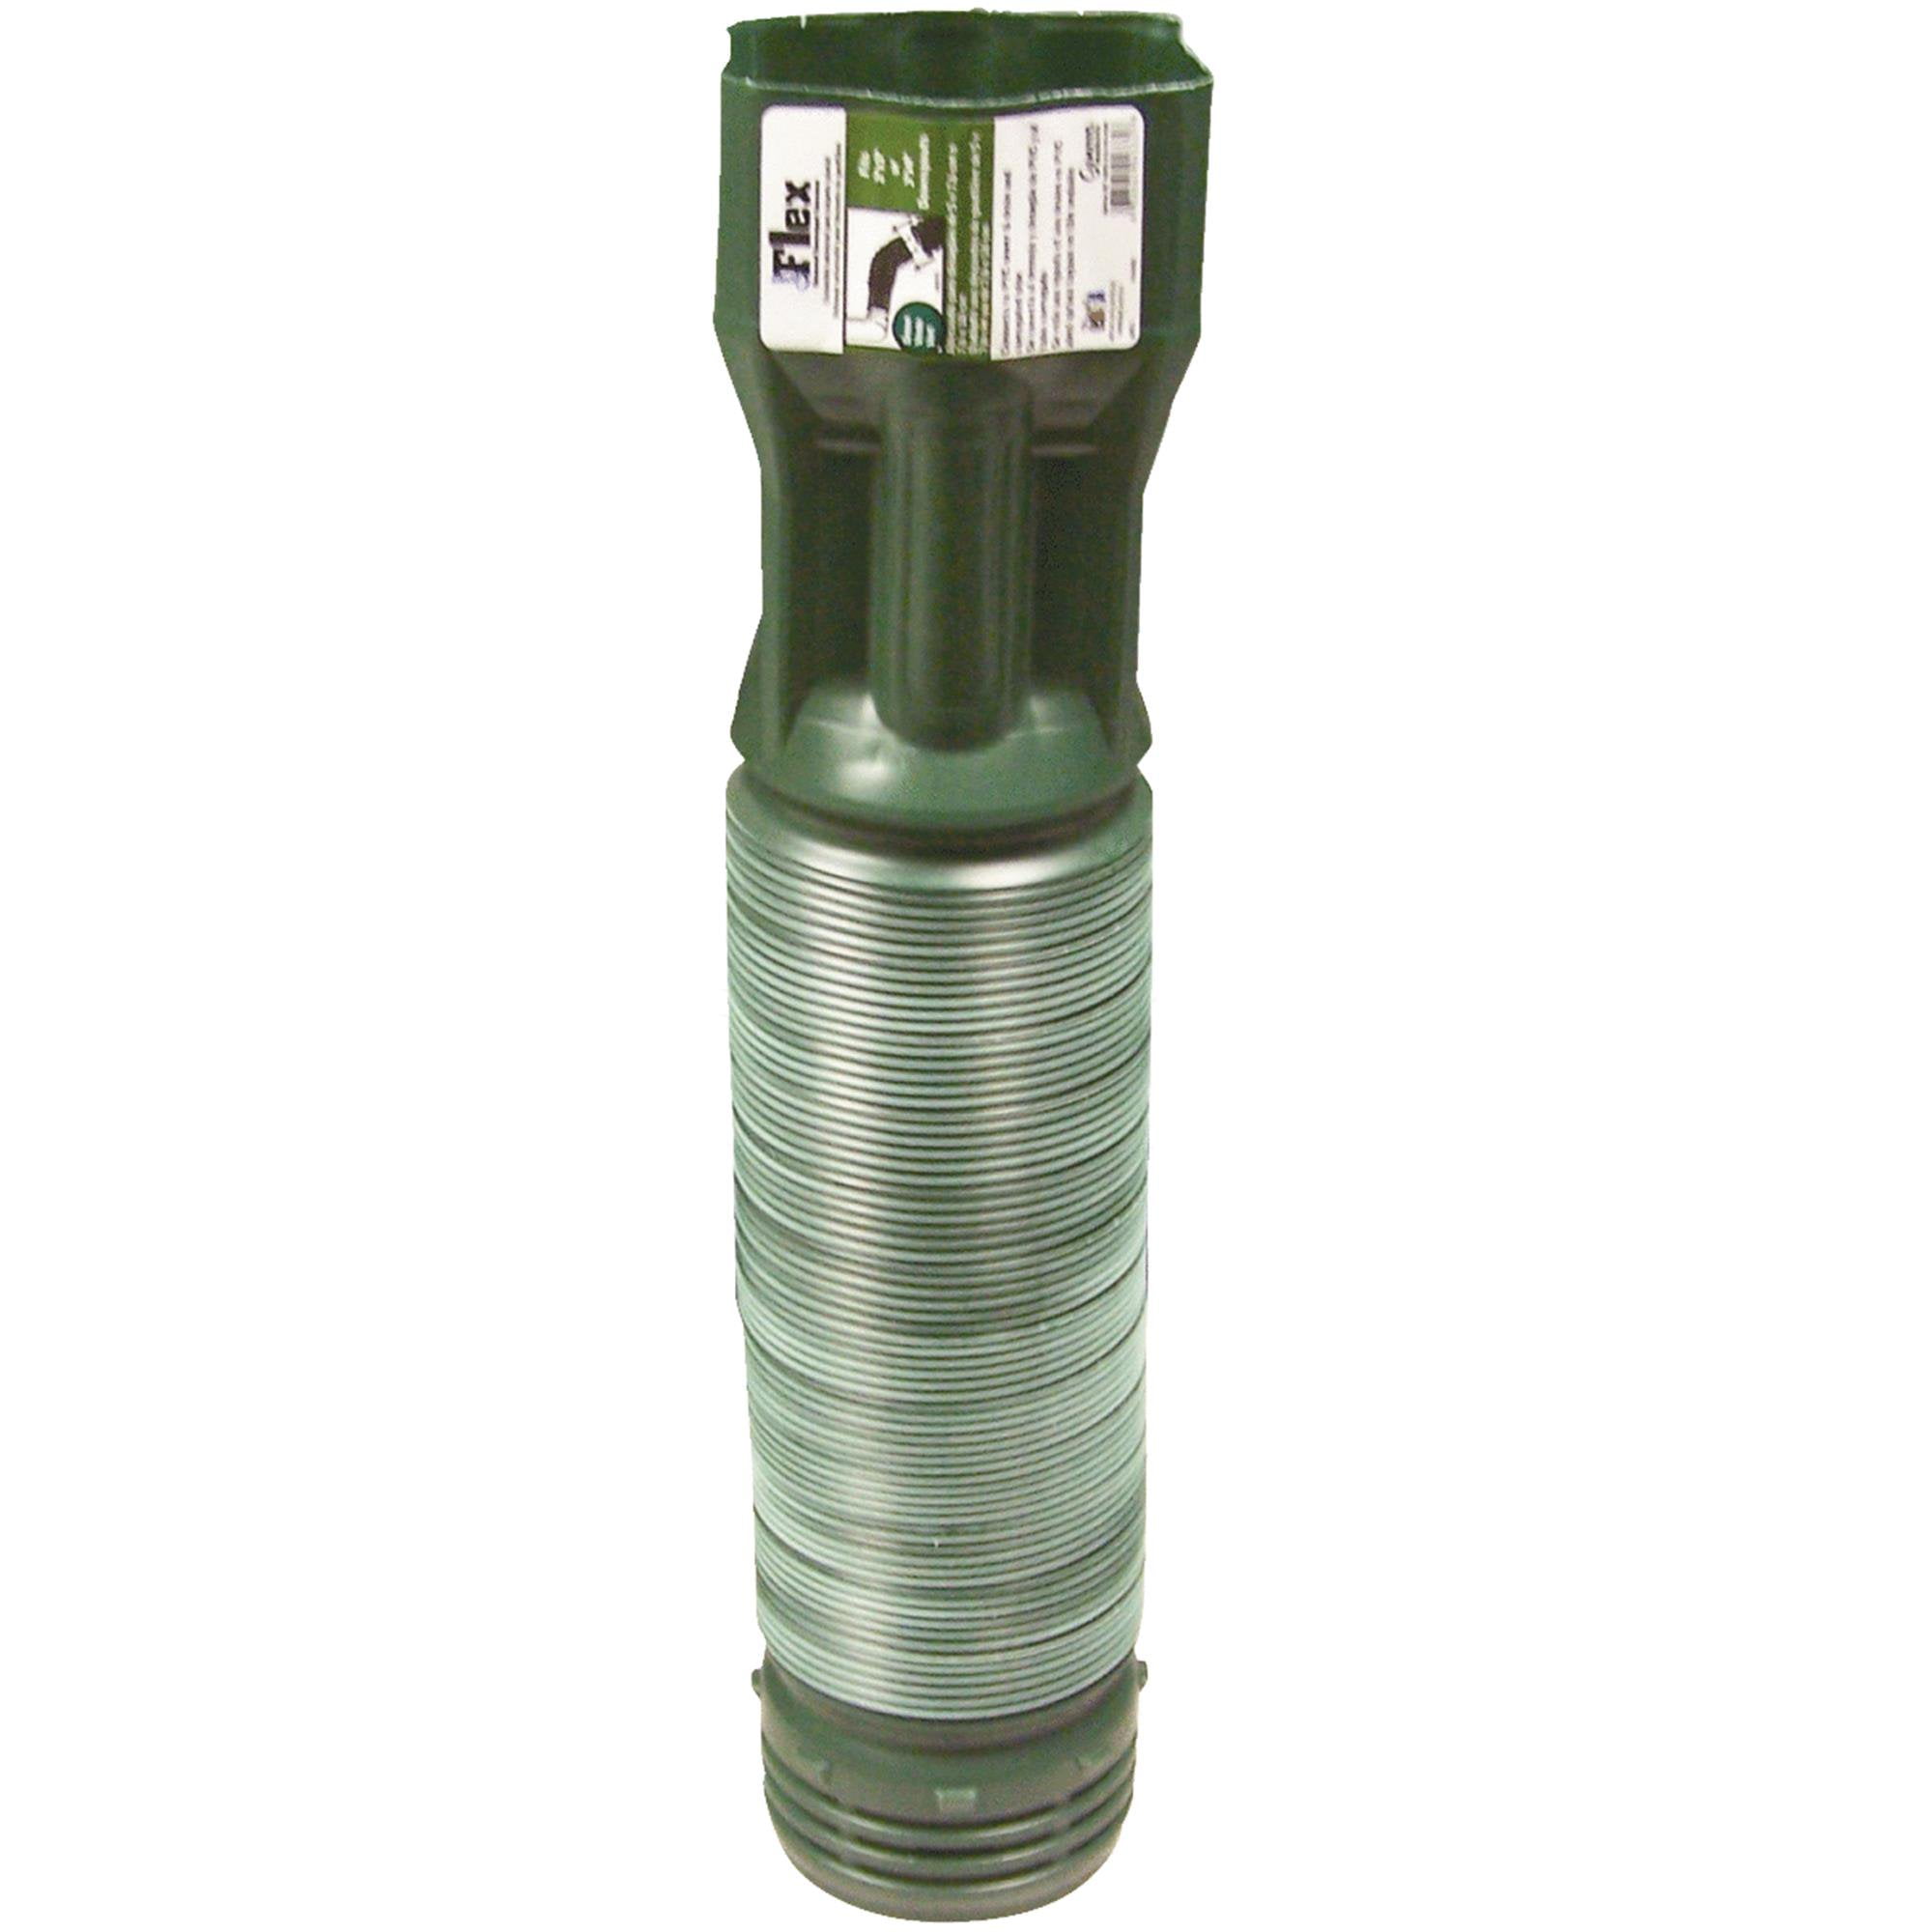 Green 19 to 55 PVC Universal Downspout Extender Pack of 5 